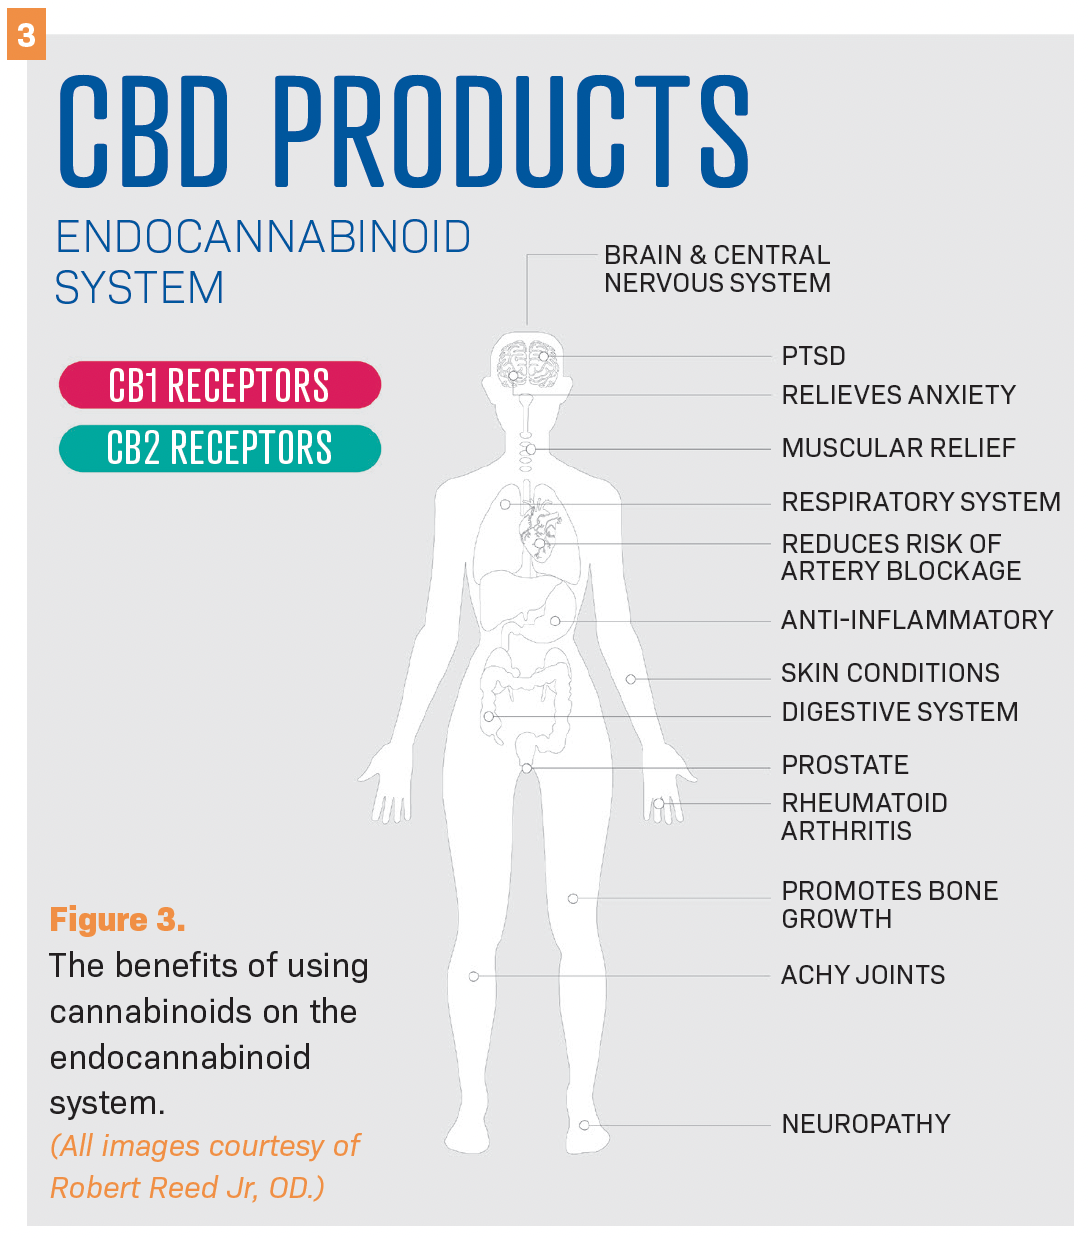 Figure 3. The benefits of using cannabinoids on the endocannabinoid system. (All images courtesy of Robert Reed Jr, OD.)